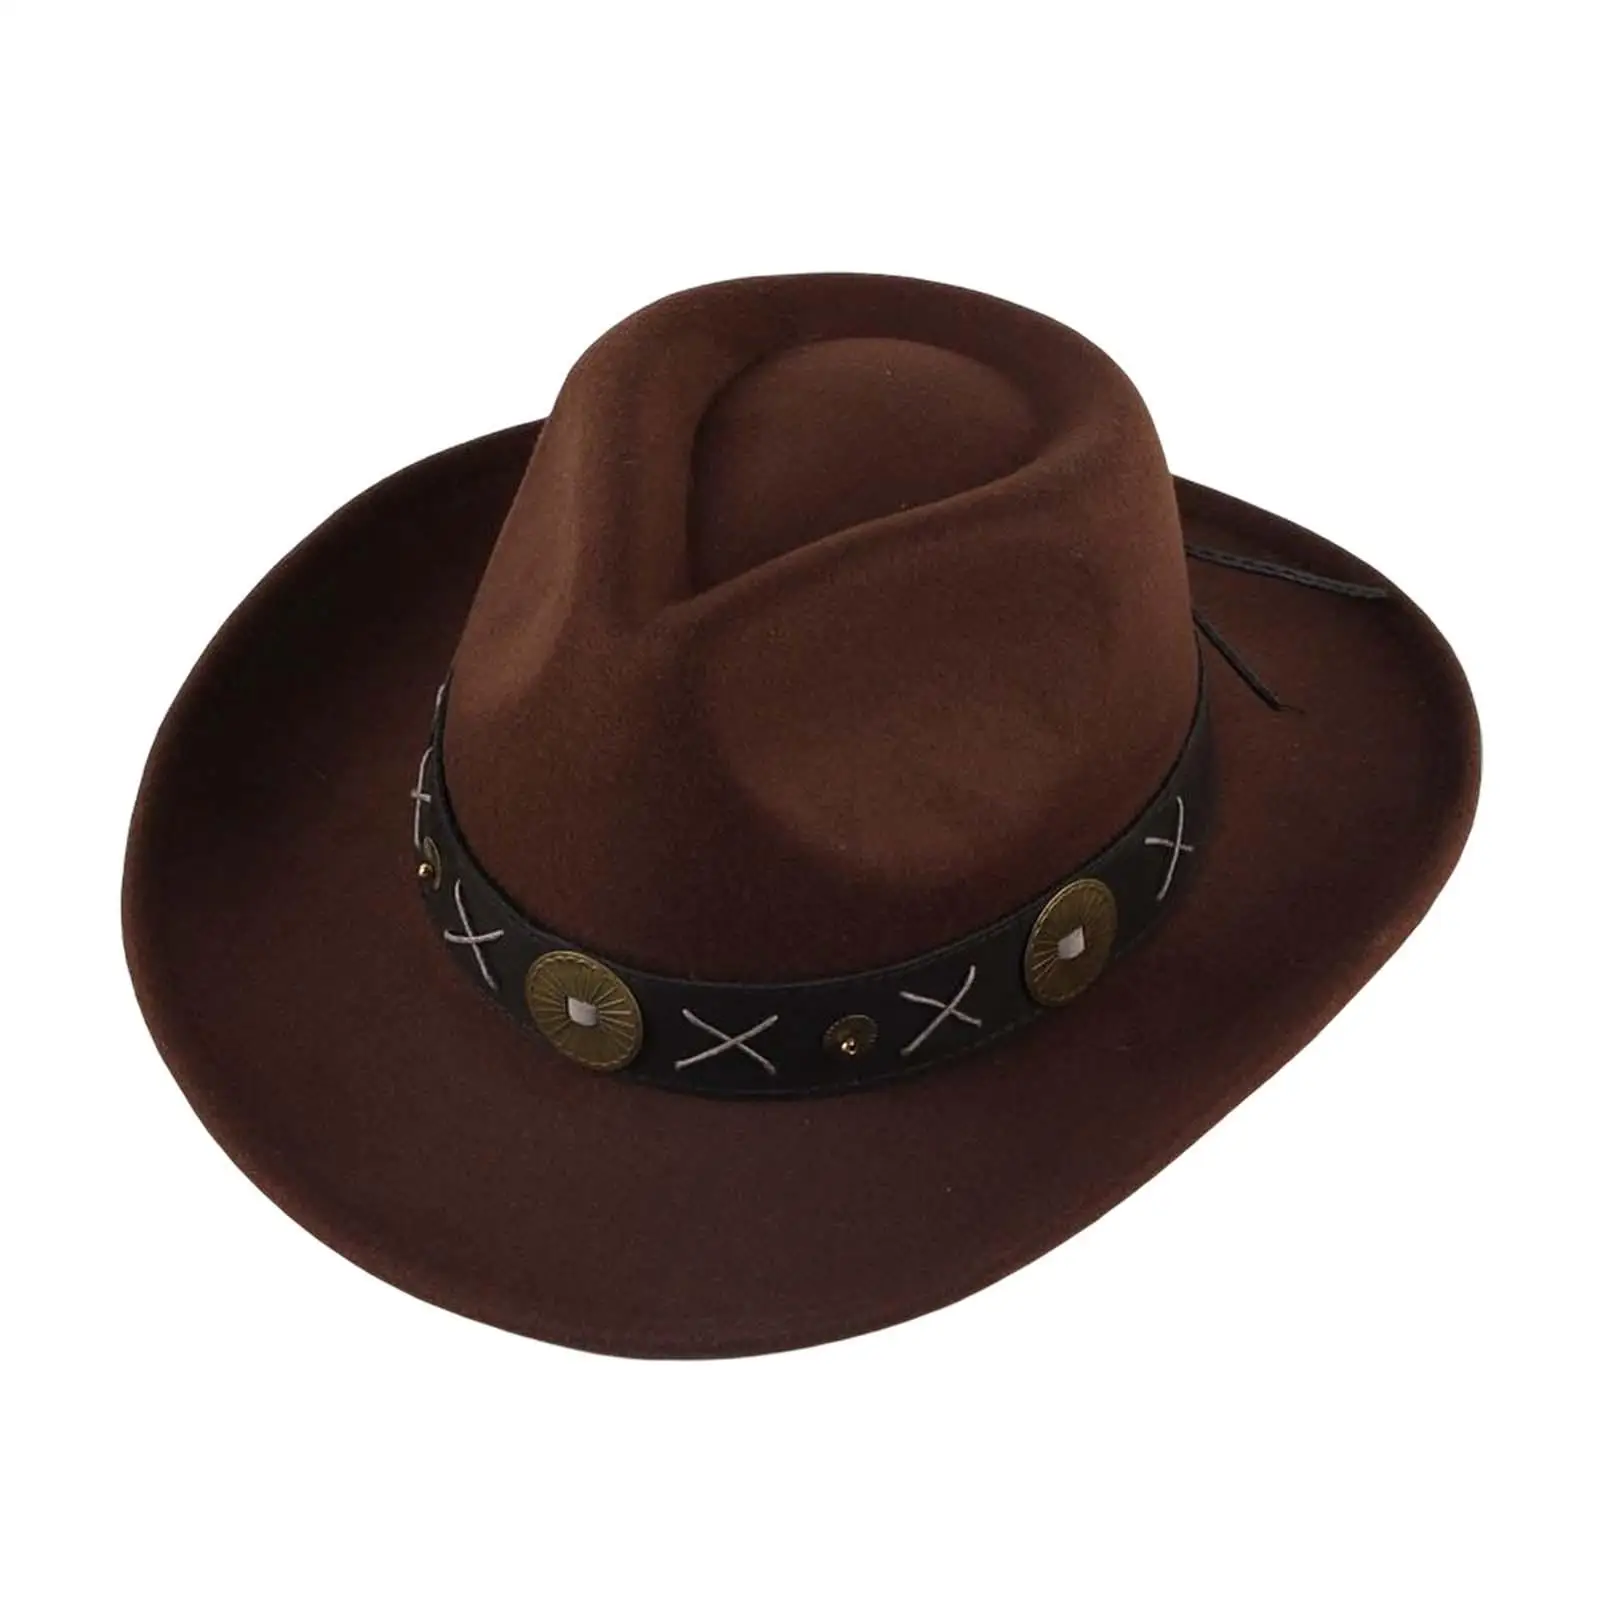 Cowboy Hat Novelty Comfortable Decor Sunhat Breathable Wide Brim Casual Cowgirl Hat for Women Men Travel Carnival Party